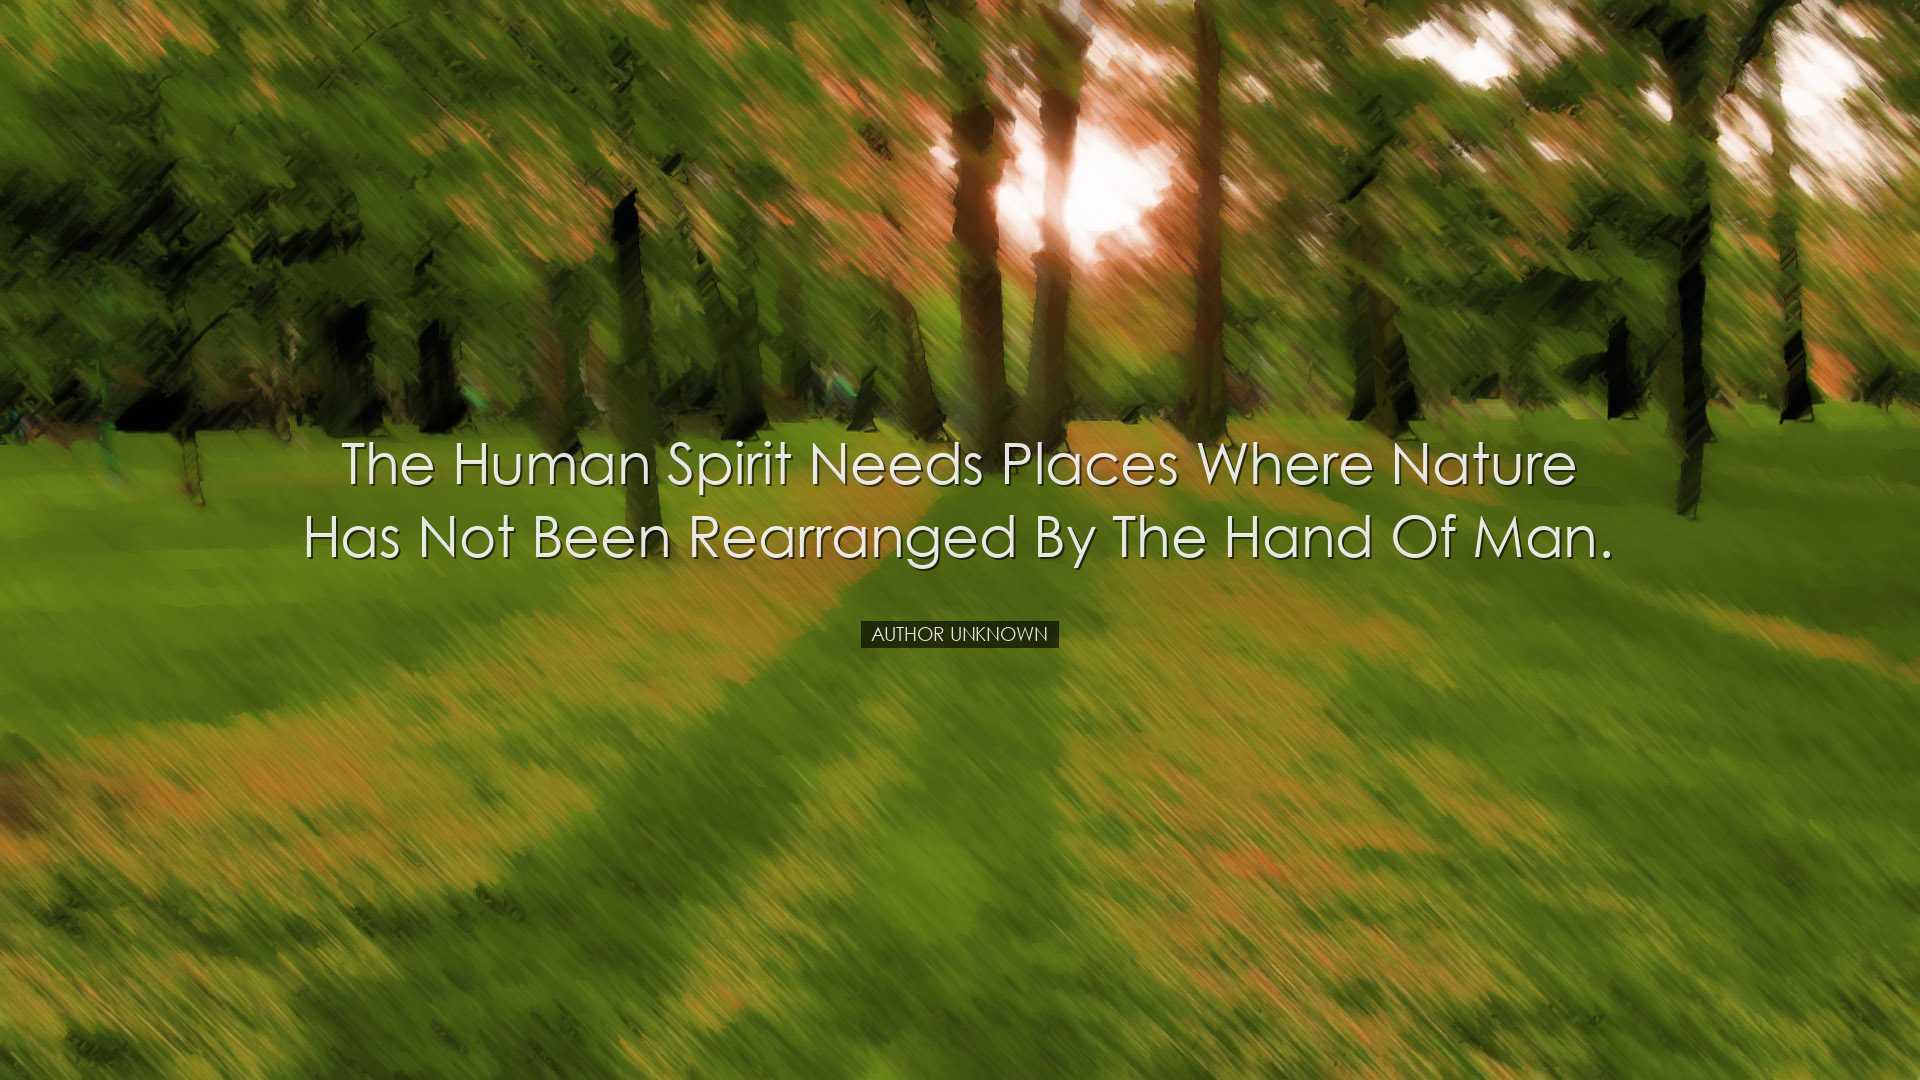 The human spirit needs places where nature has not been rearranged